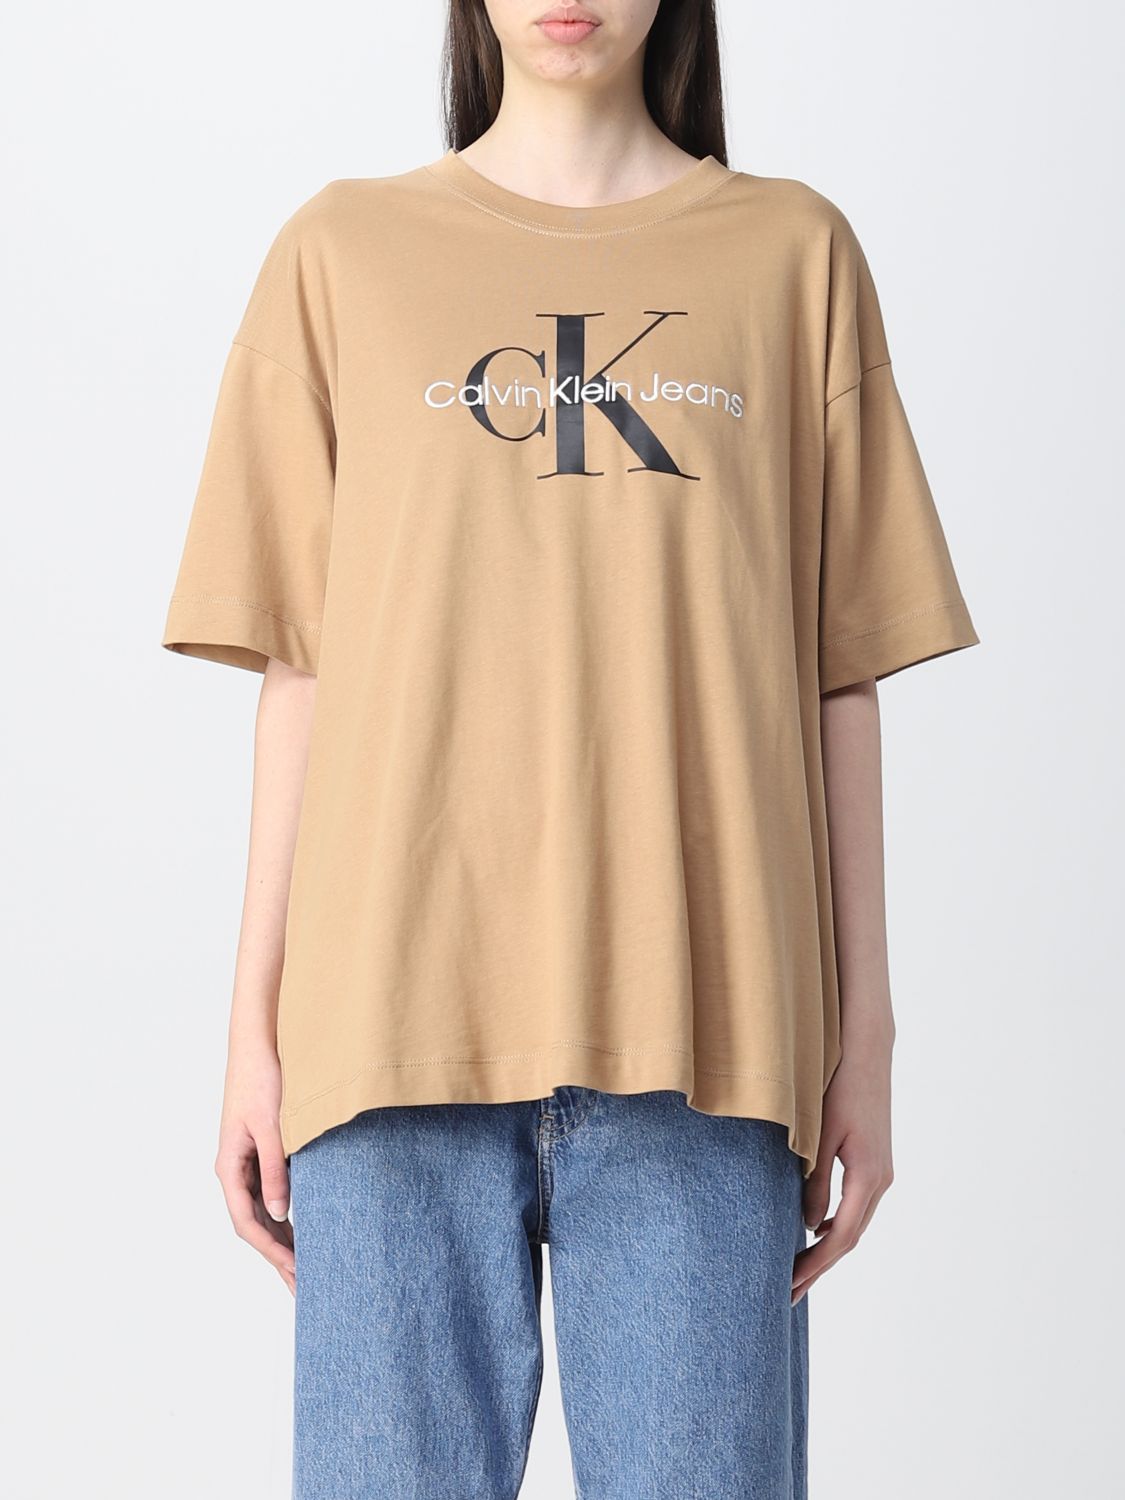 CALVIN KLEIN JEANS: oversized t-shirt with CK logo - Beige | Calvin Klein  Jeans t-shirt J20J219948 online on 